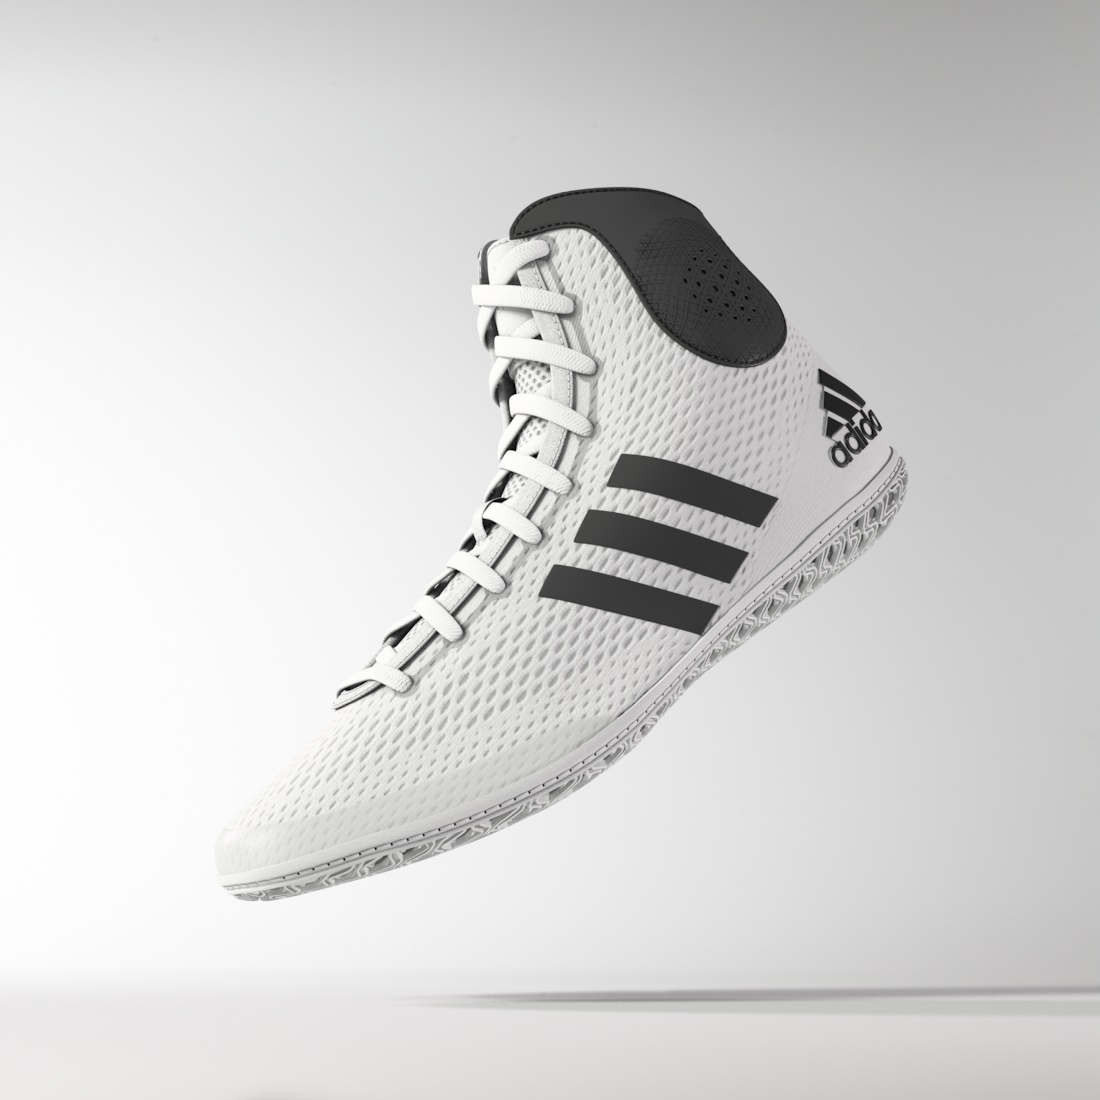 new adidas wrestling shoes